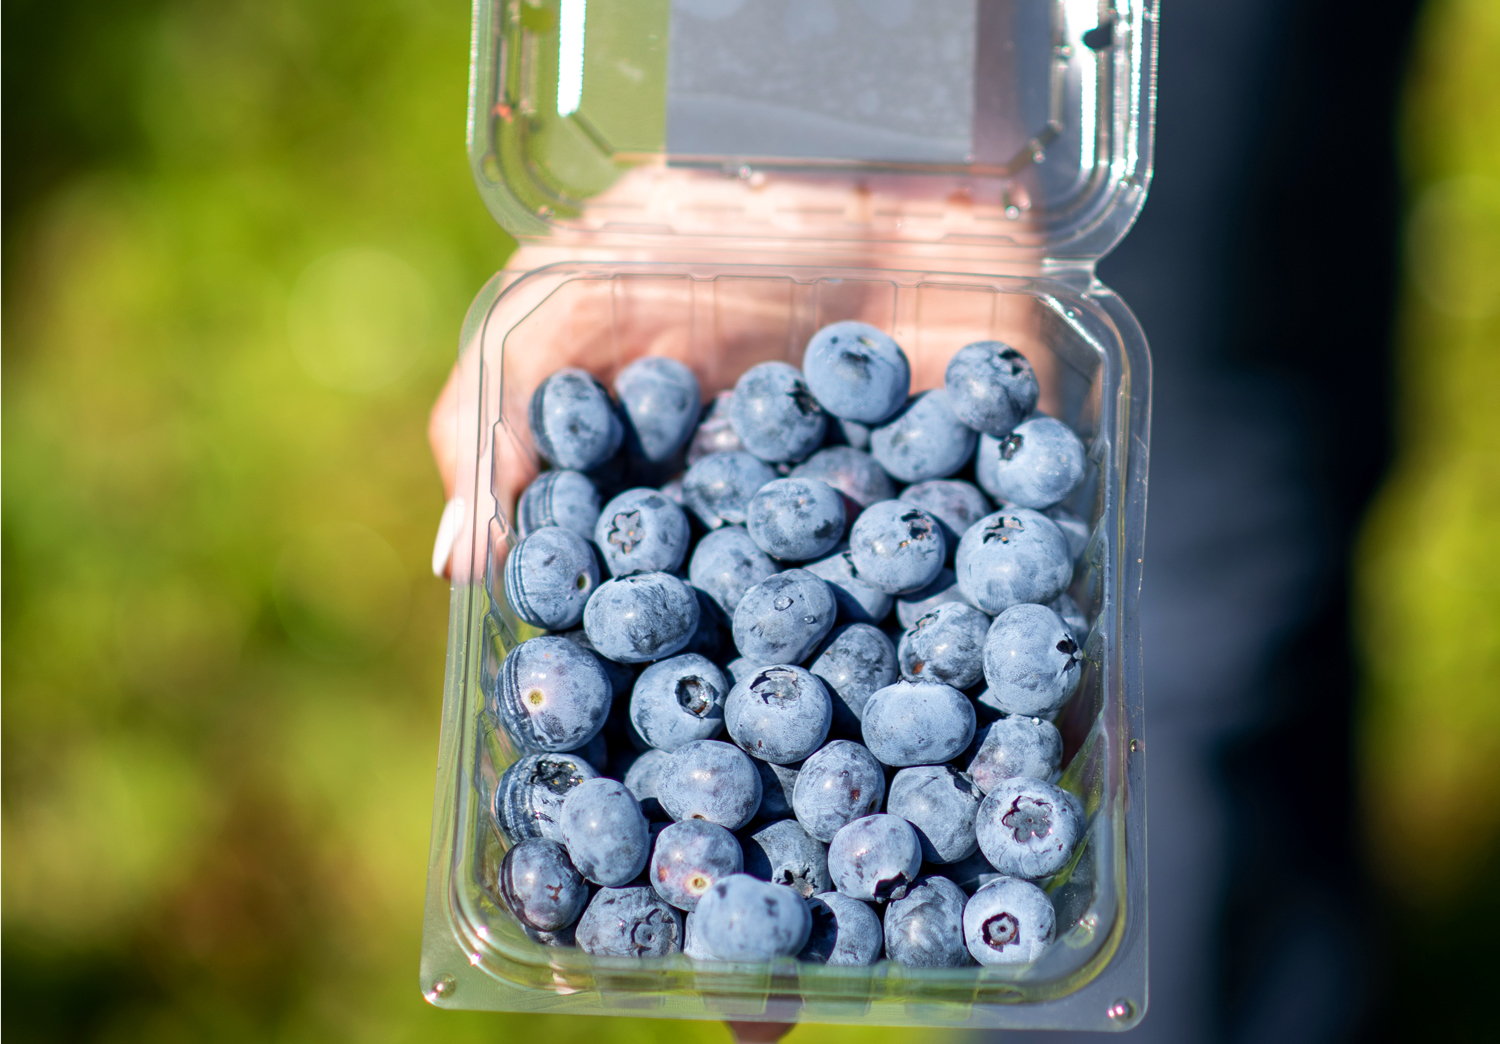 Image of hand holding a container of Always Fresh blueberries